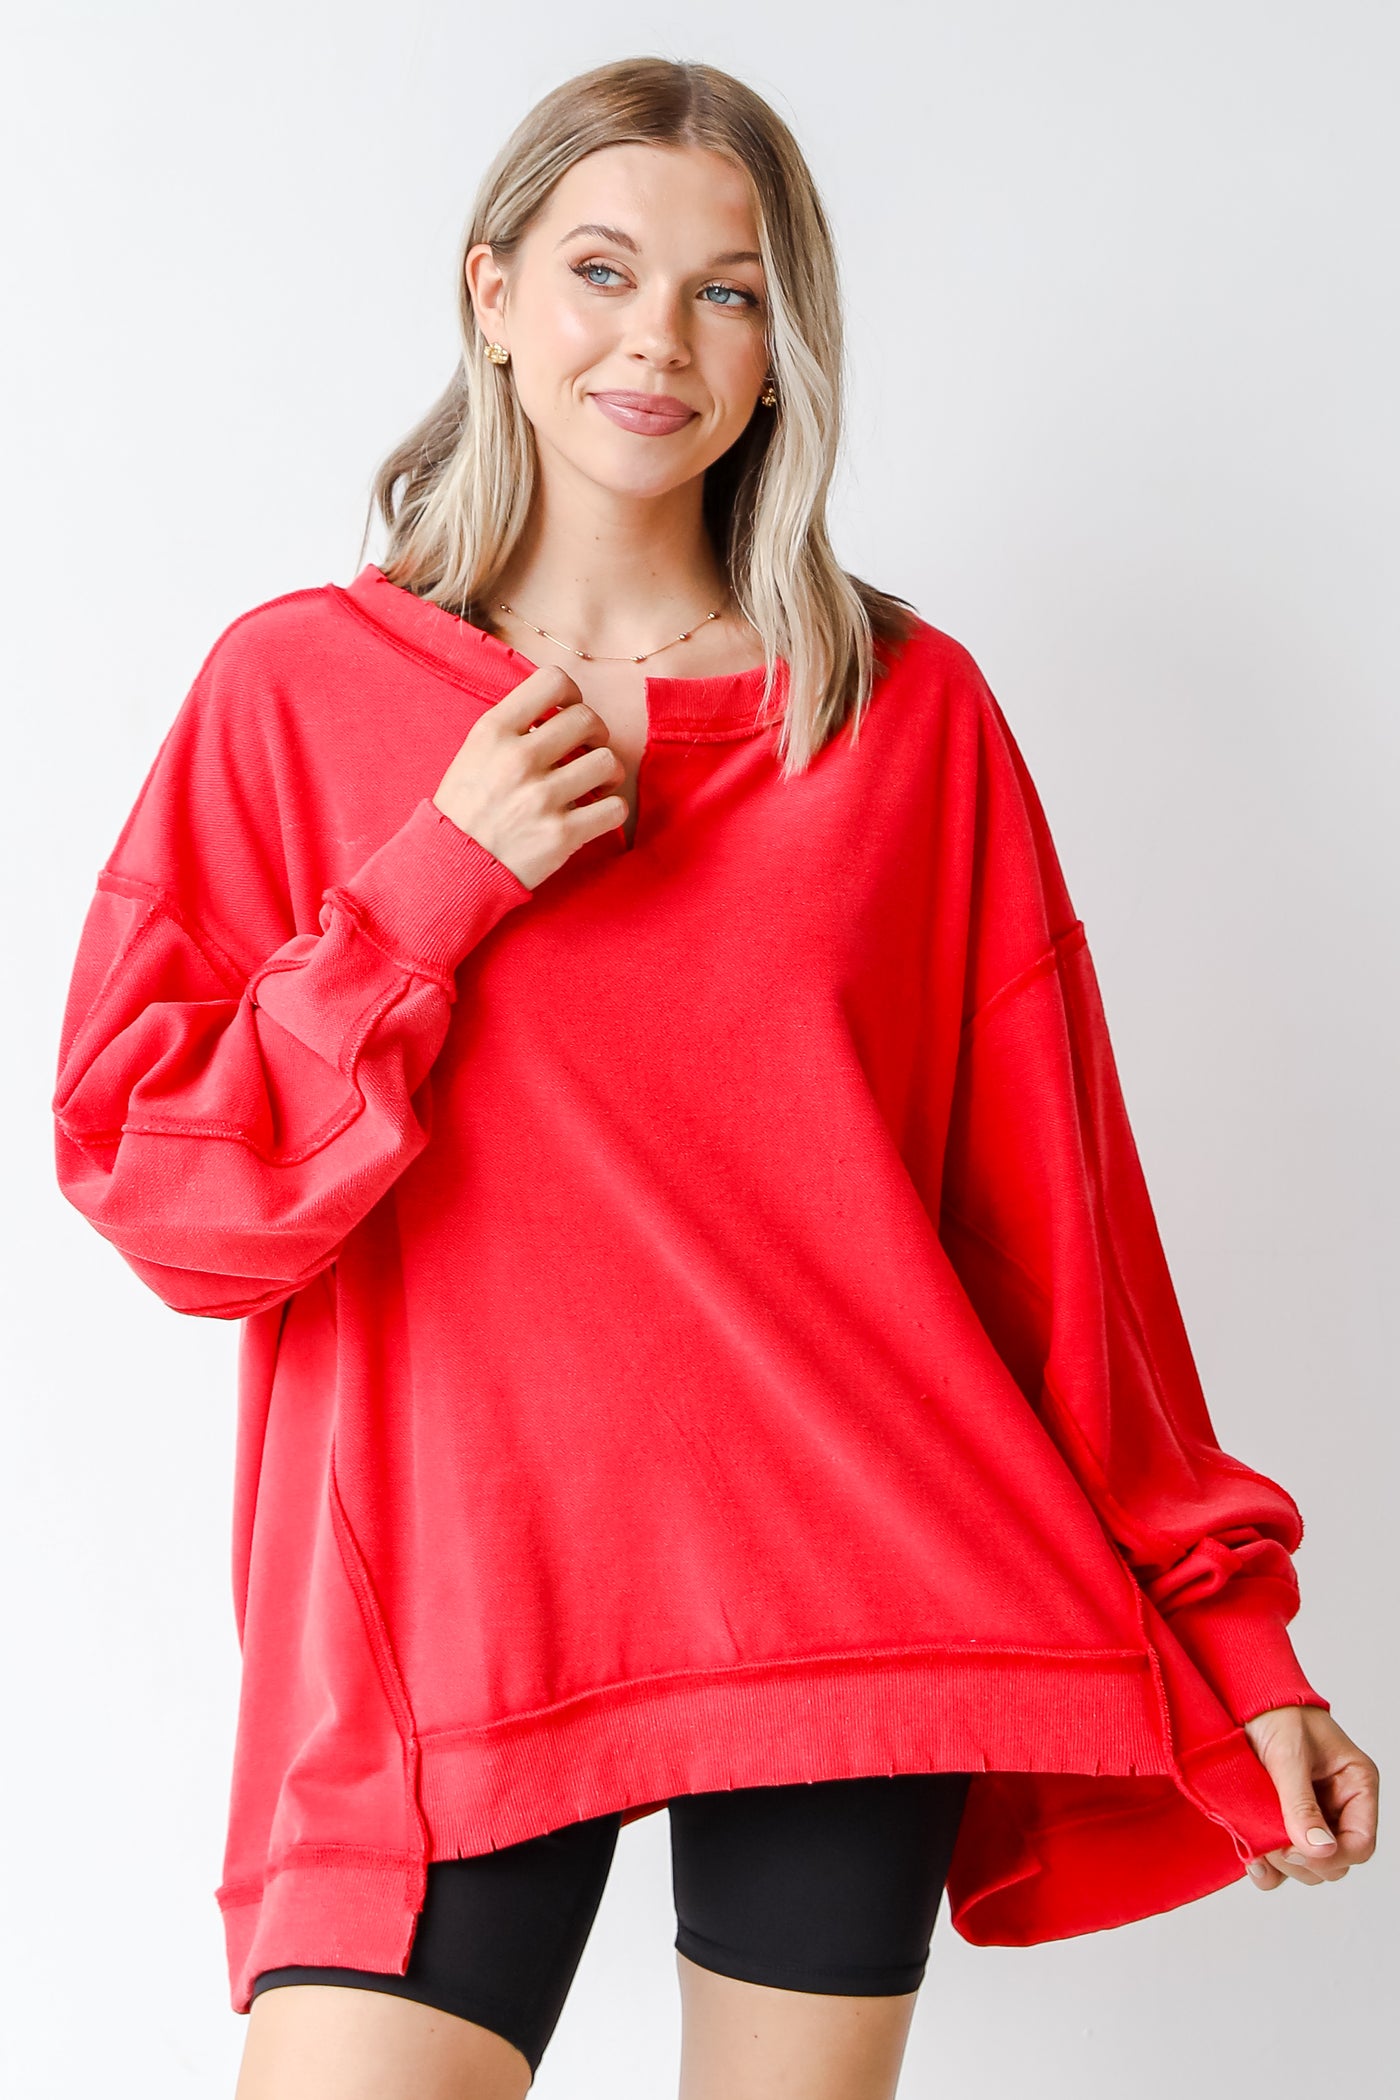 This comfy sweatshirt is designed with a soft and stretchy French terry knit with ribbed knit contrasting.